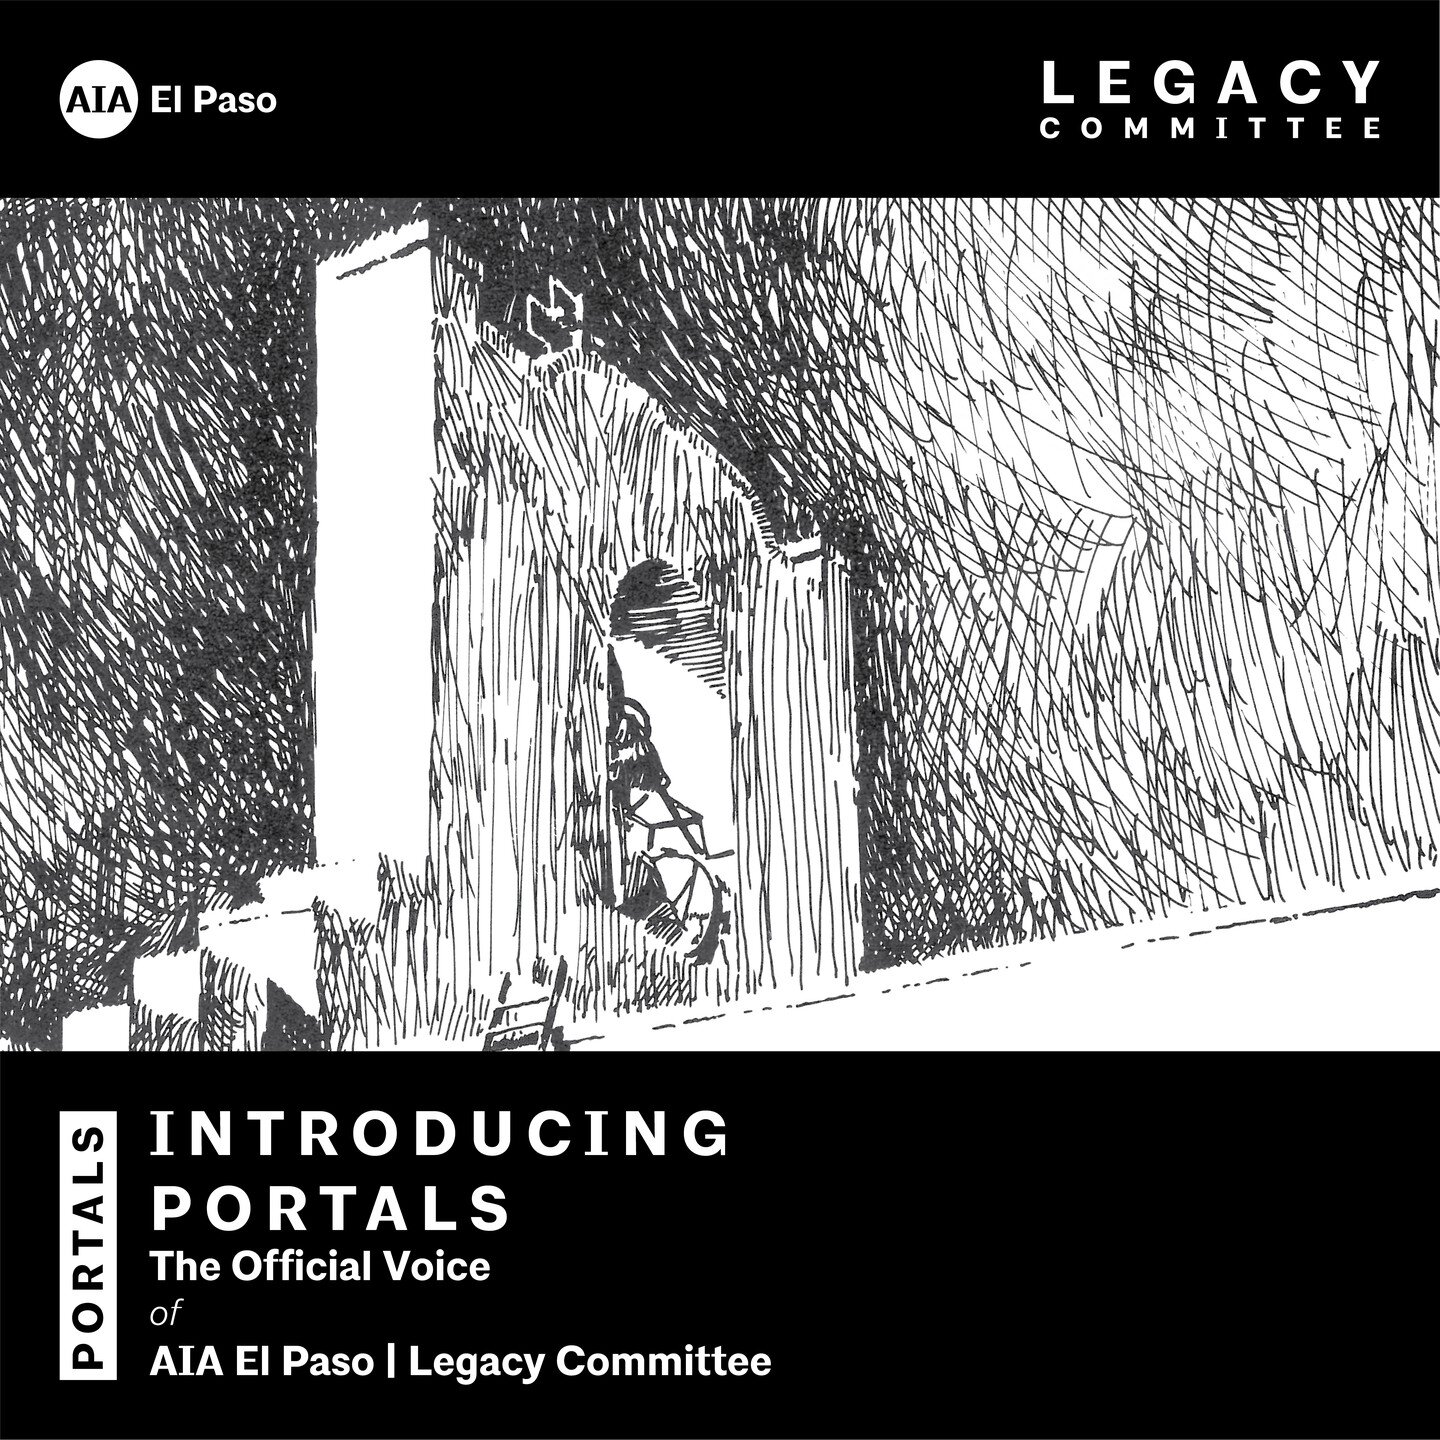 We are very pleased to announce PORTALS the voice of AIA El Paso | Legacy Committee. Stay tuned for upcoming posts celebrating our Chapter, its members, and unique architectural works from across our region! 

#aiaelpaso #aiaelpasochapter #legacy #el